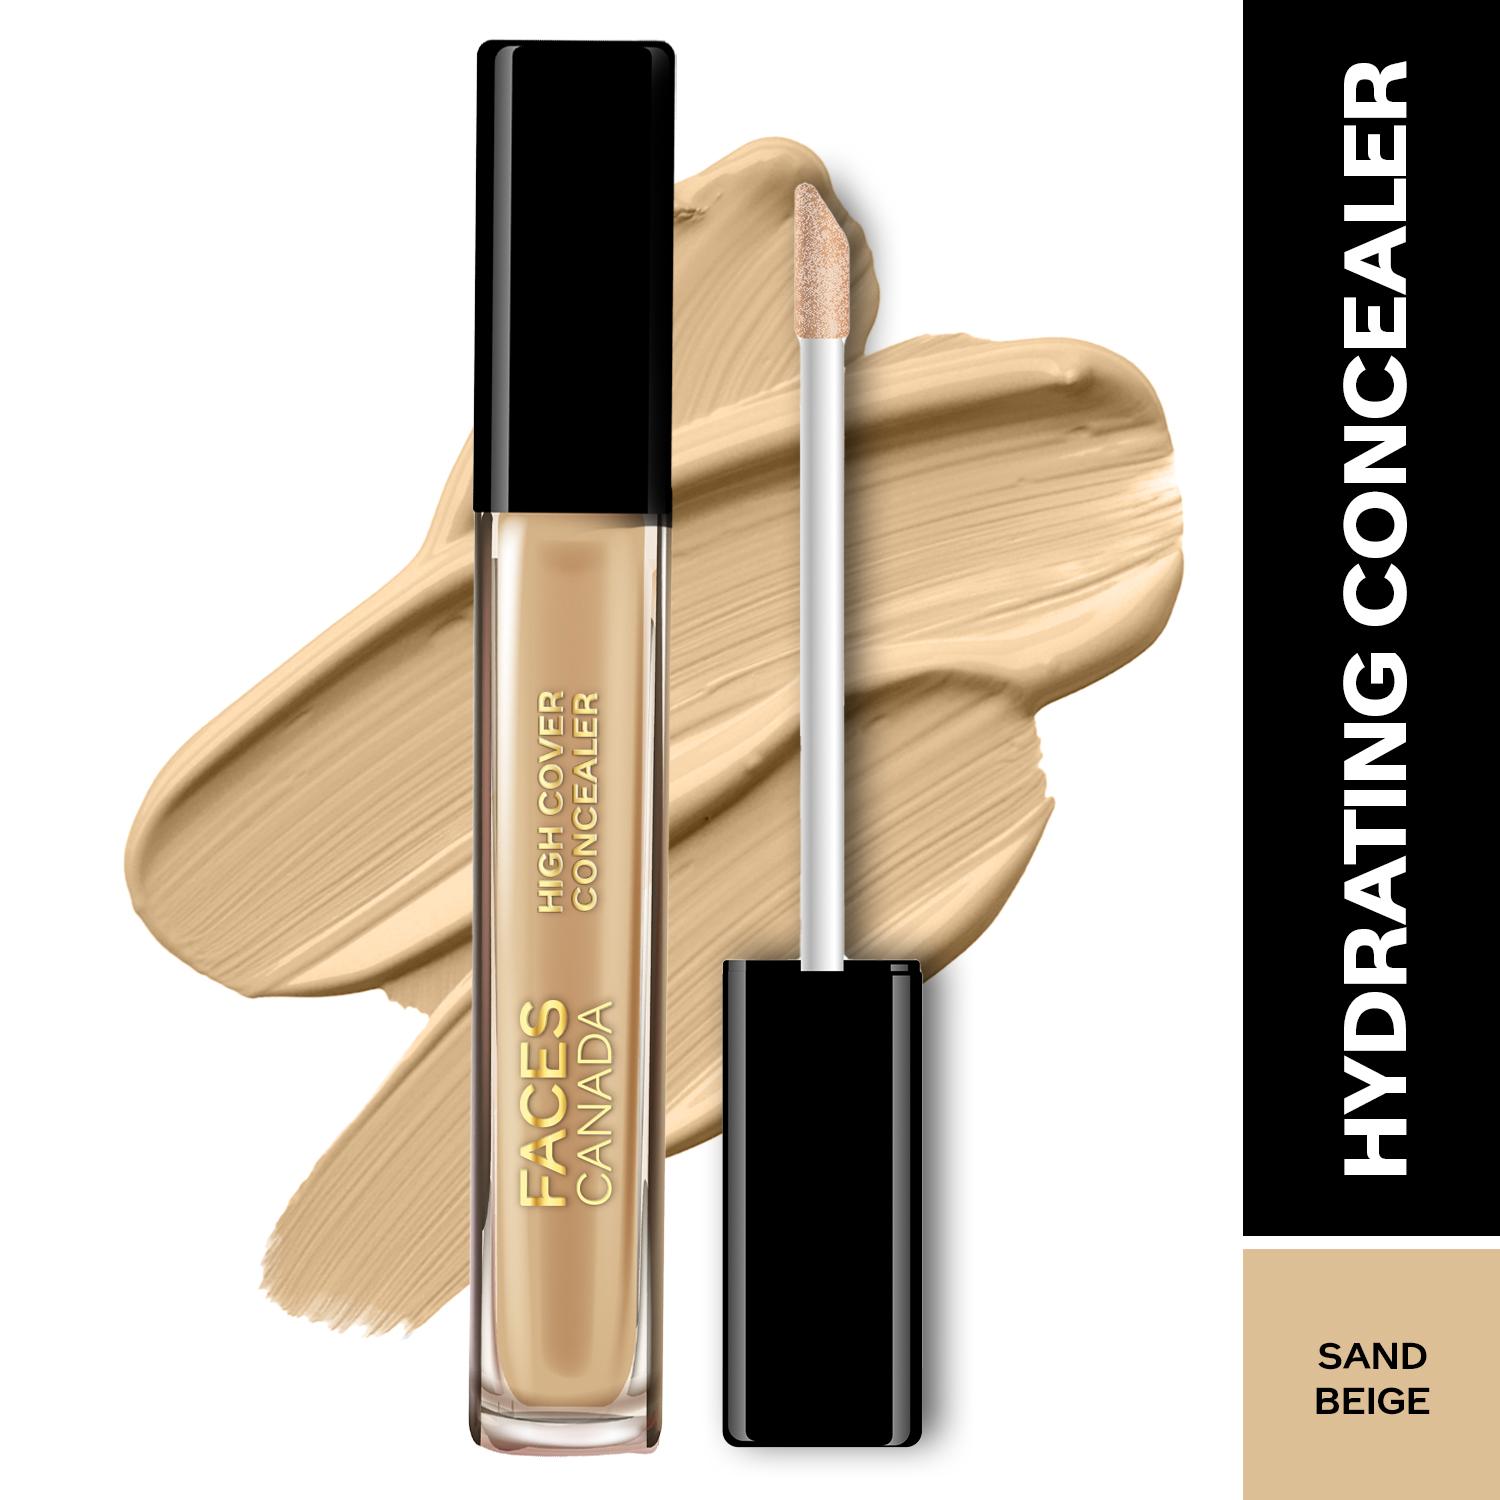 Faces Canada | Faces Canada High Cover Concealer - 01 Sand Beige (4ml)